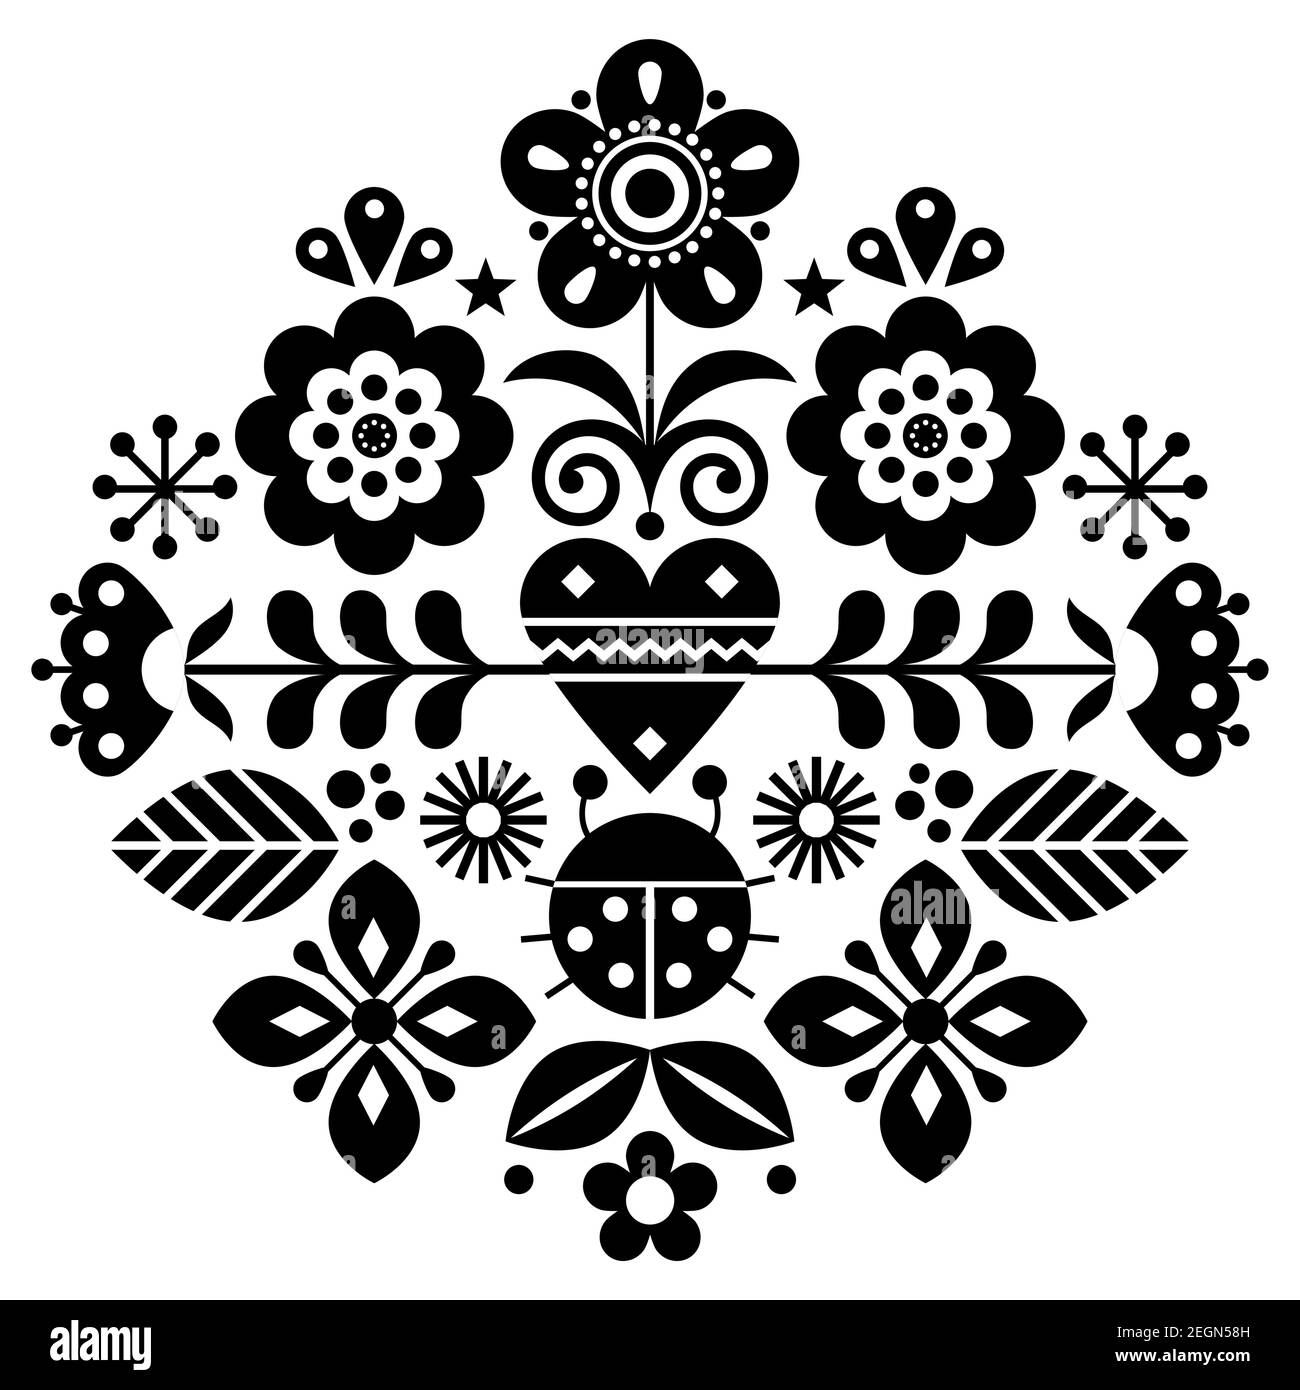 Scandinavian cute folk vector pattern with flowers and ladybird, black and white floral pattern inspired by traditional embroidery from Sweden, Norway Stock Vector